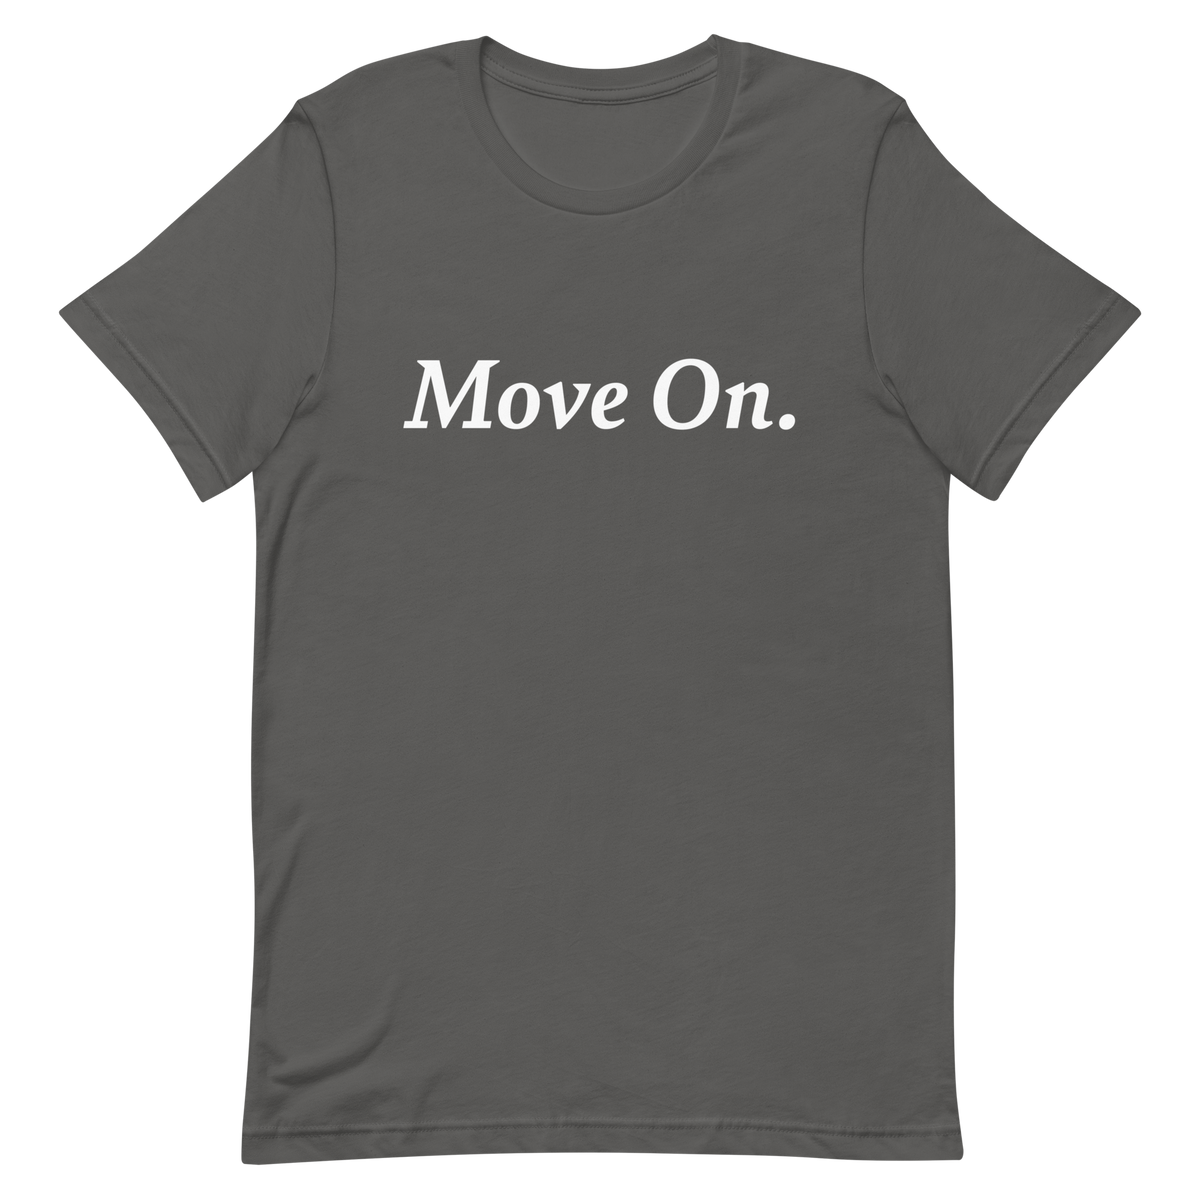 Move On. T-Shirt (White Text)